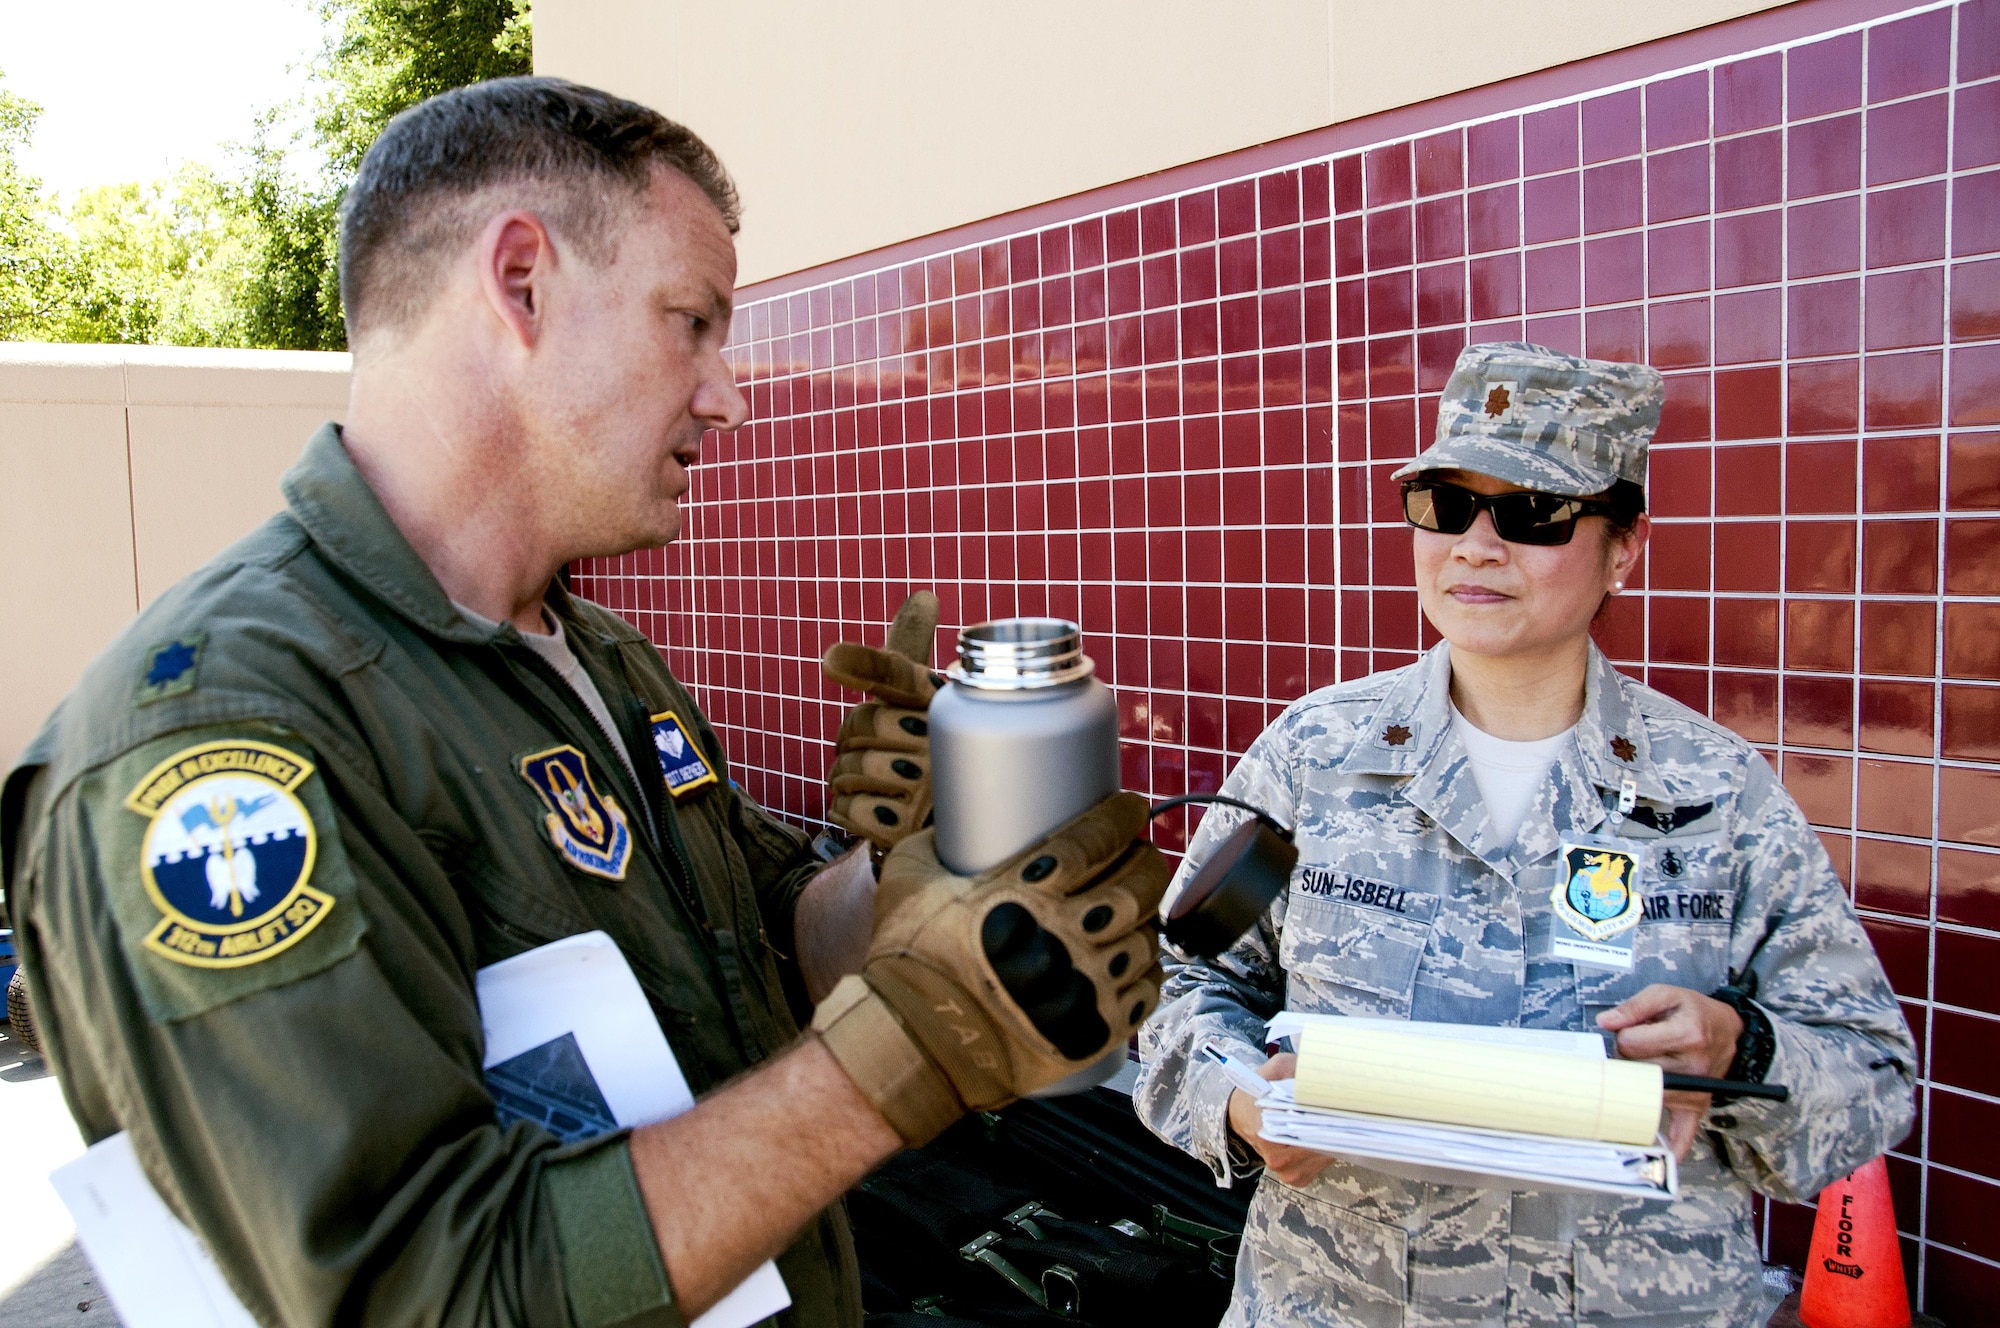 Lt. Col. Scott Shepard, 349th Aeromedical Staging Squadron flight surgeon, is interviewed by Maj. Theresa Sun-Isbell, 349th ASTS wing inspection team lead, as part of a unit evaluation inspection for Patriot Wyvern at Travis Air Force, Cali., on July 22, 2017.  The 349th ASTS members had one hour to set up the En-Route Patient Staging Facility and communications. They accomplished their task in less than 30 minutes. (U.S. Air Force photo by Staff Sgt. Daniel Phelps)